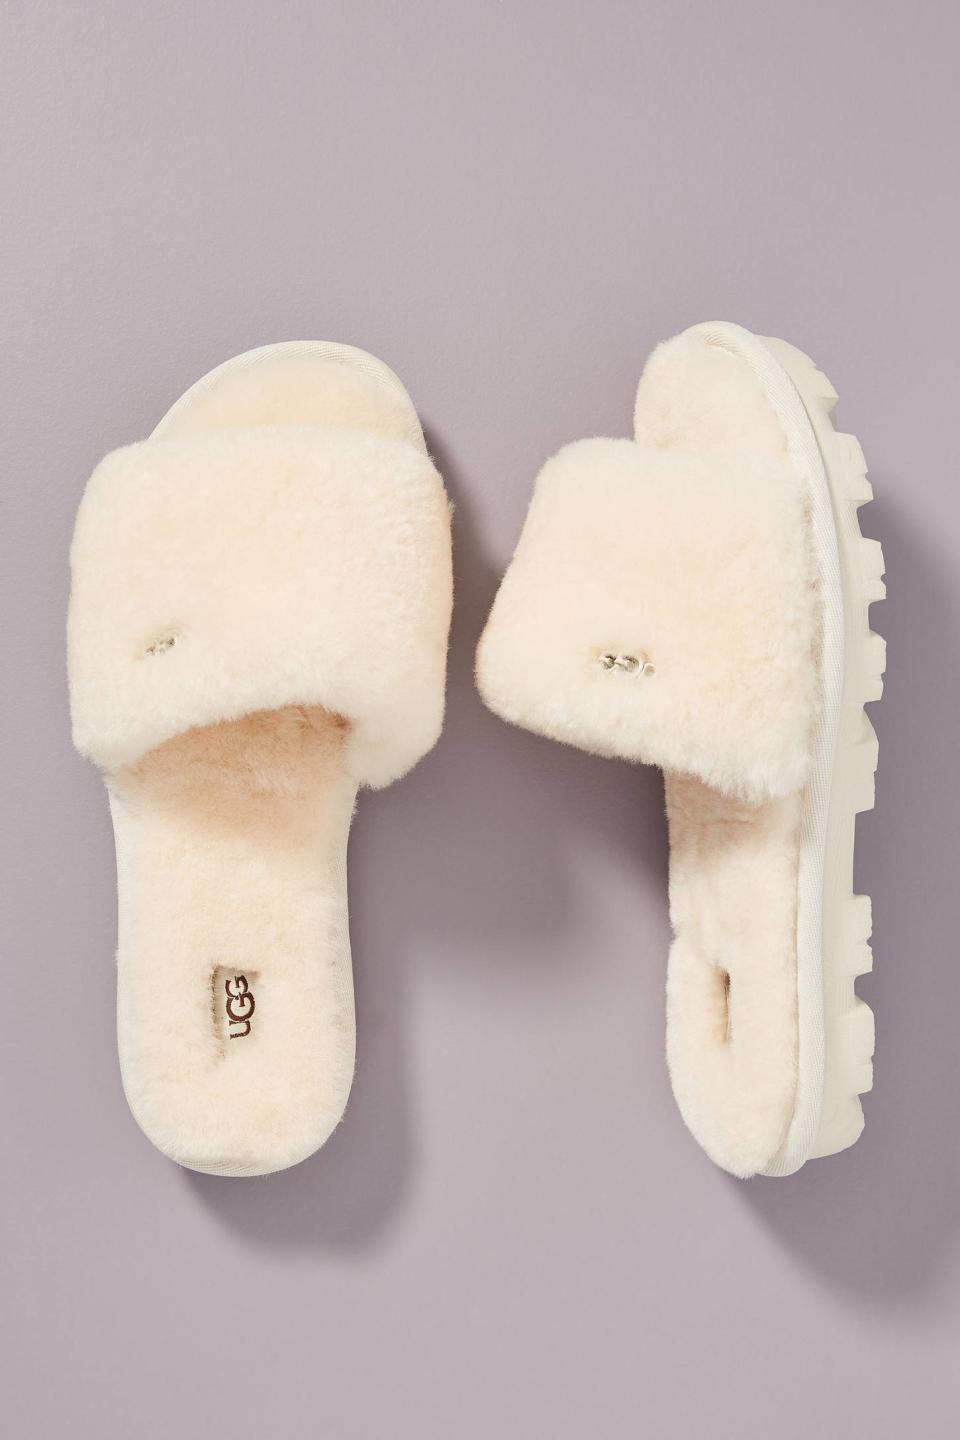 1) Cozette Slippers